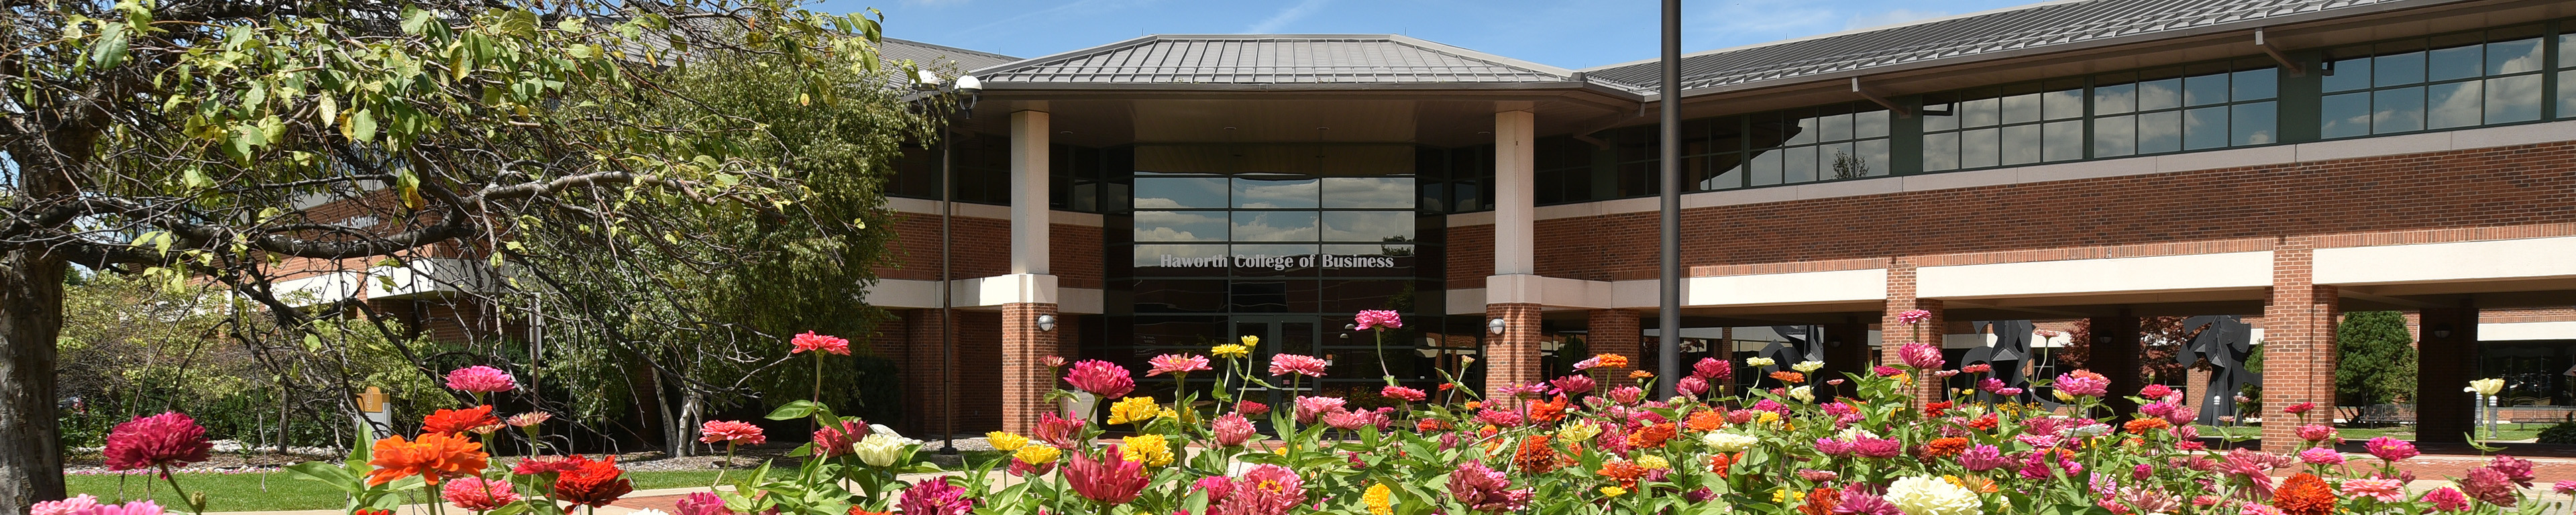 Flowers in bloom outside of the exterior of the Haworth College of Business. 